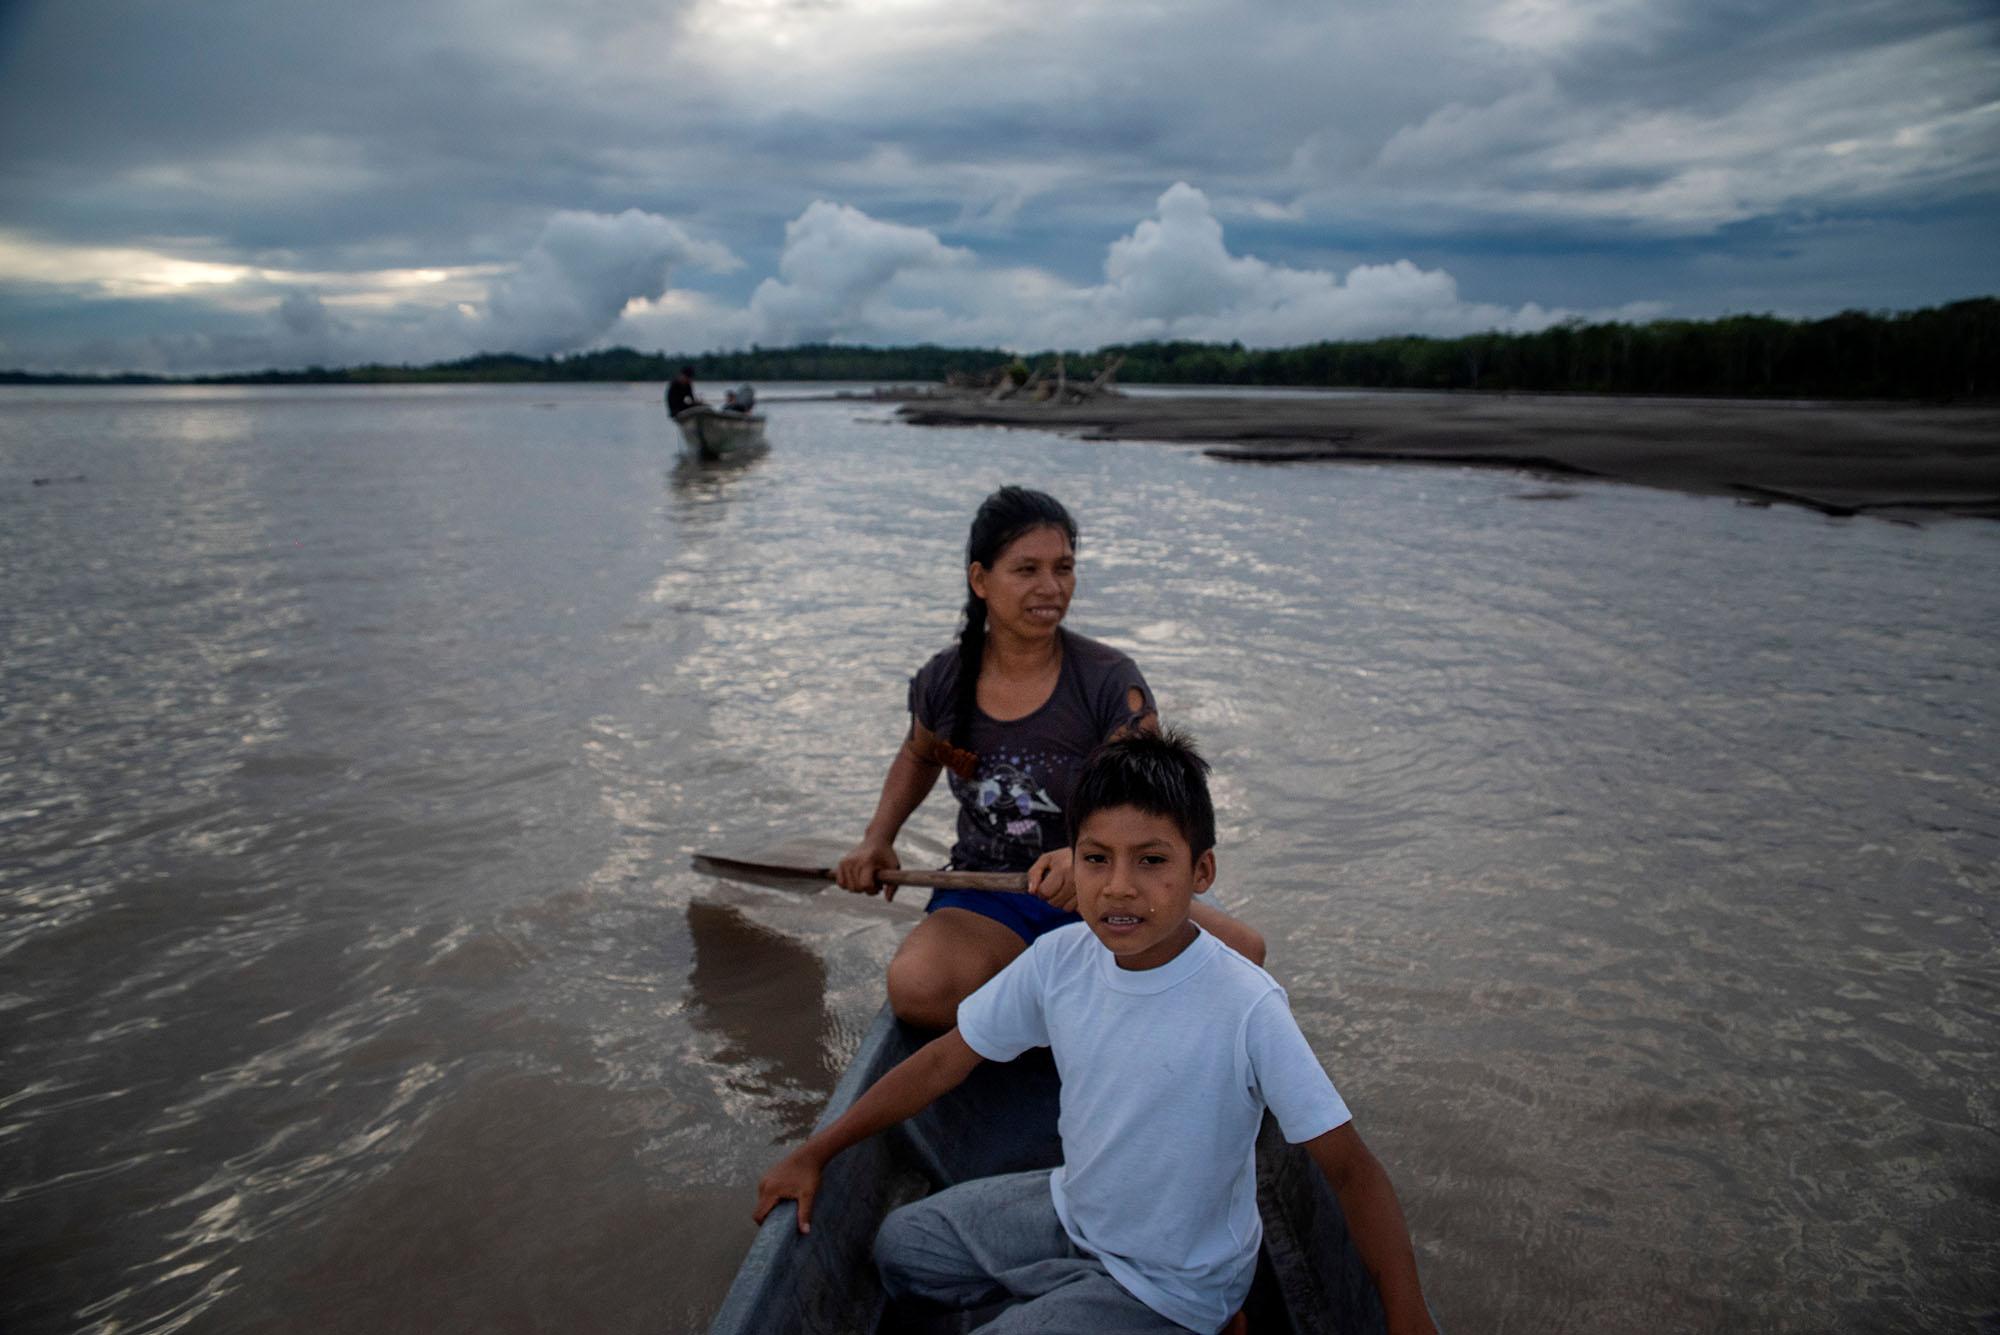 Andres Santy (9) and her mom Sany Santy (31) back to fishing dday in the Napo River on the...